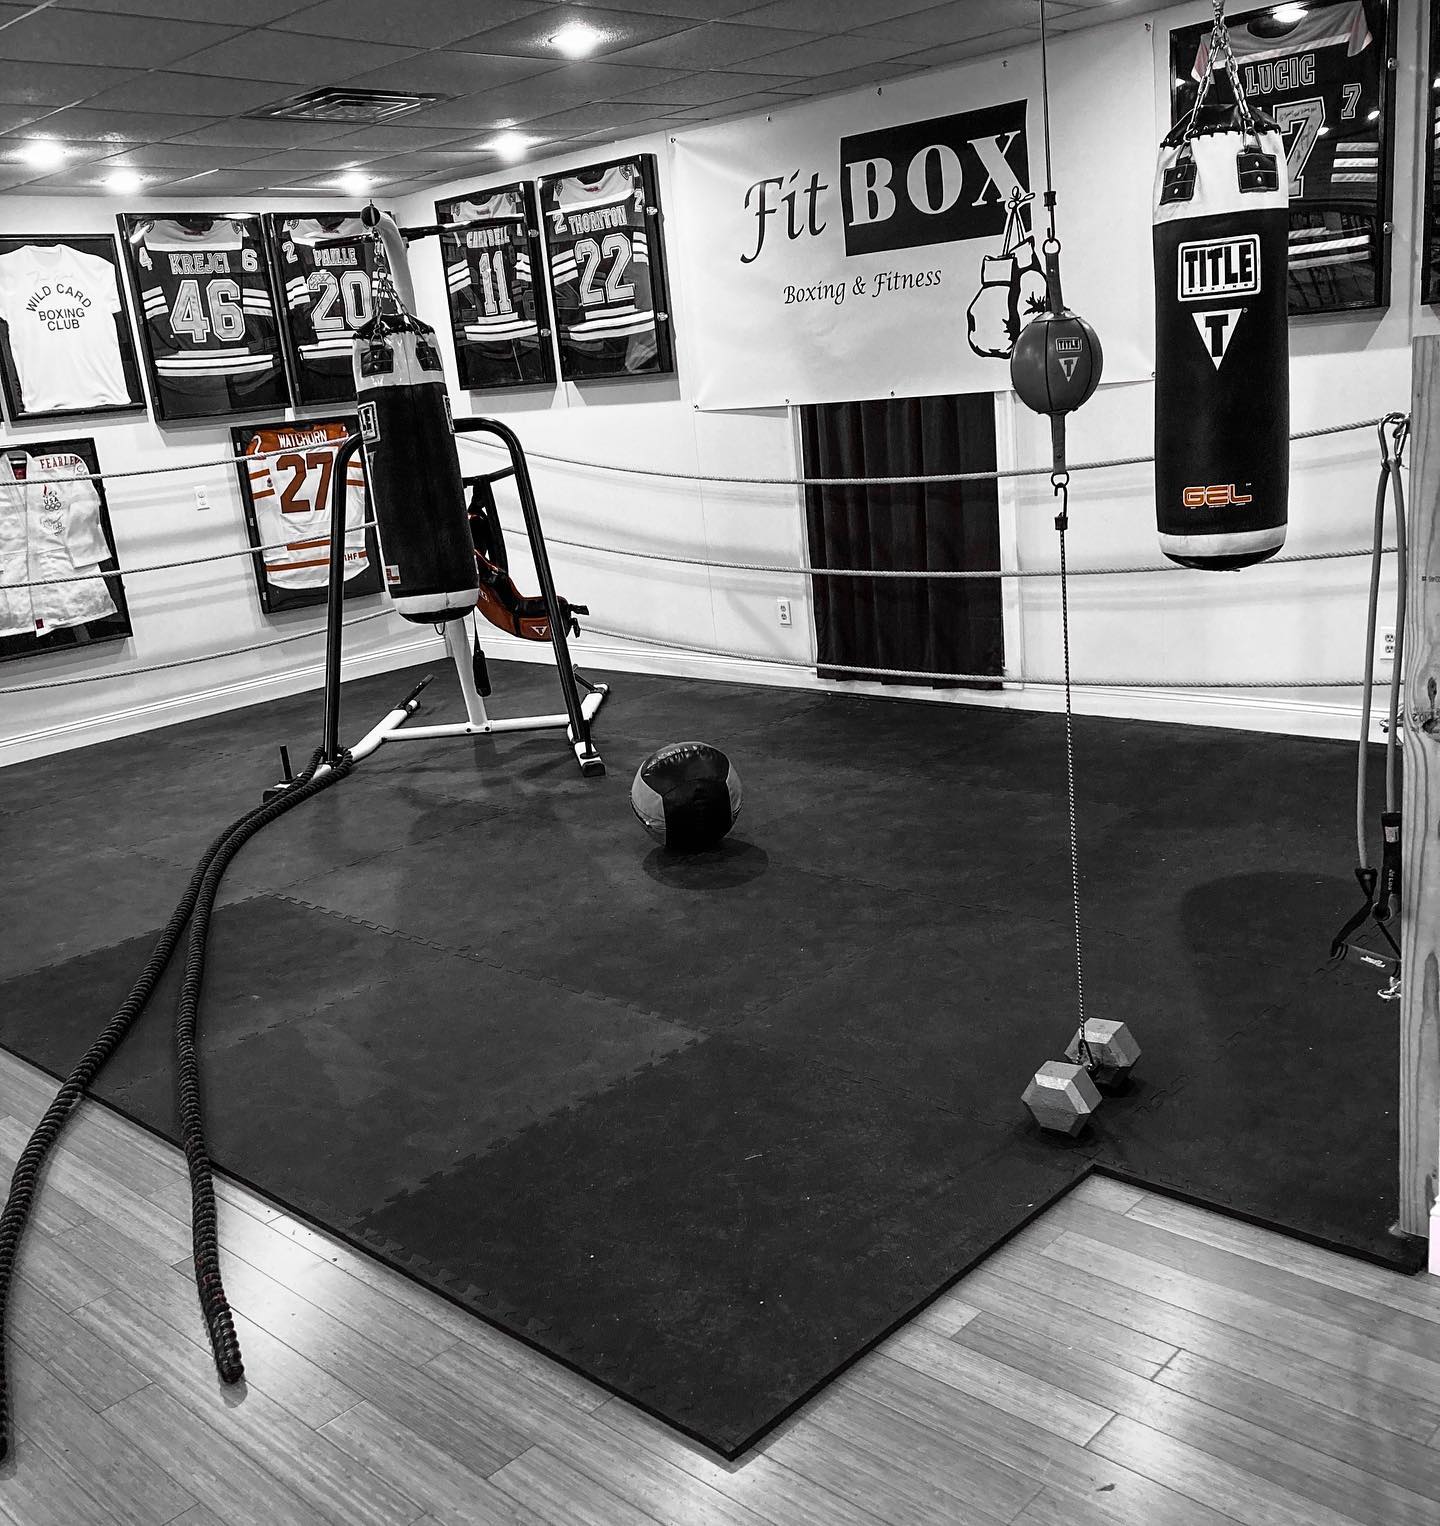 .. Start somewhere then Start here. Learn the proper form and technique that will get you the most out of your Boxing workout.
Contact us to schedule a free boxing workout with Boston’s well-known boxing trainer @tommymcinerney at call/text (781)727-9503 or email fitbox@outlook.com .
.